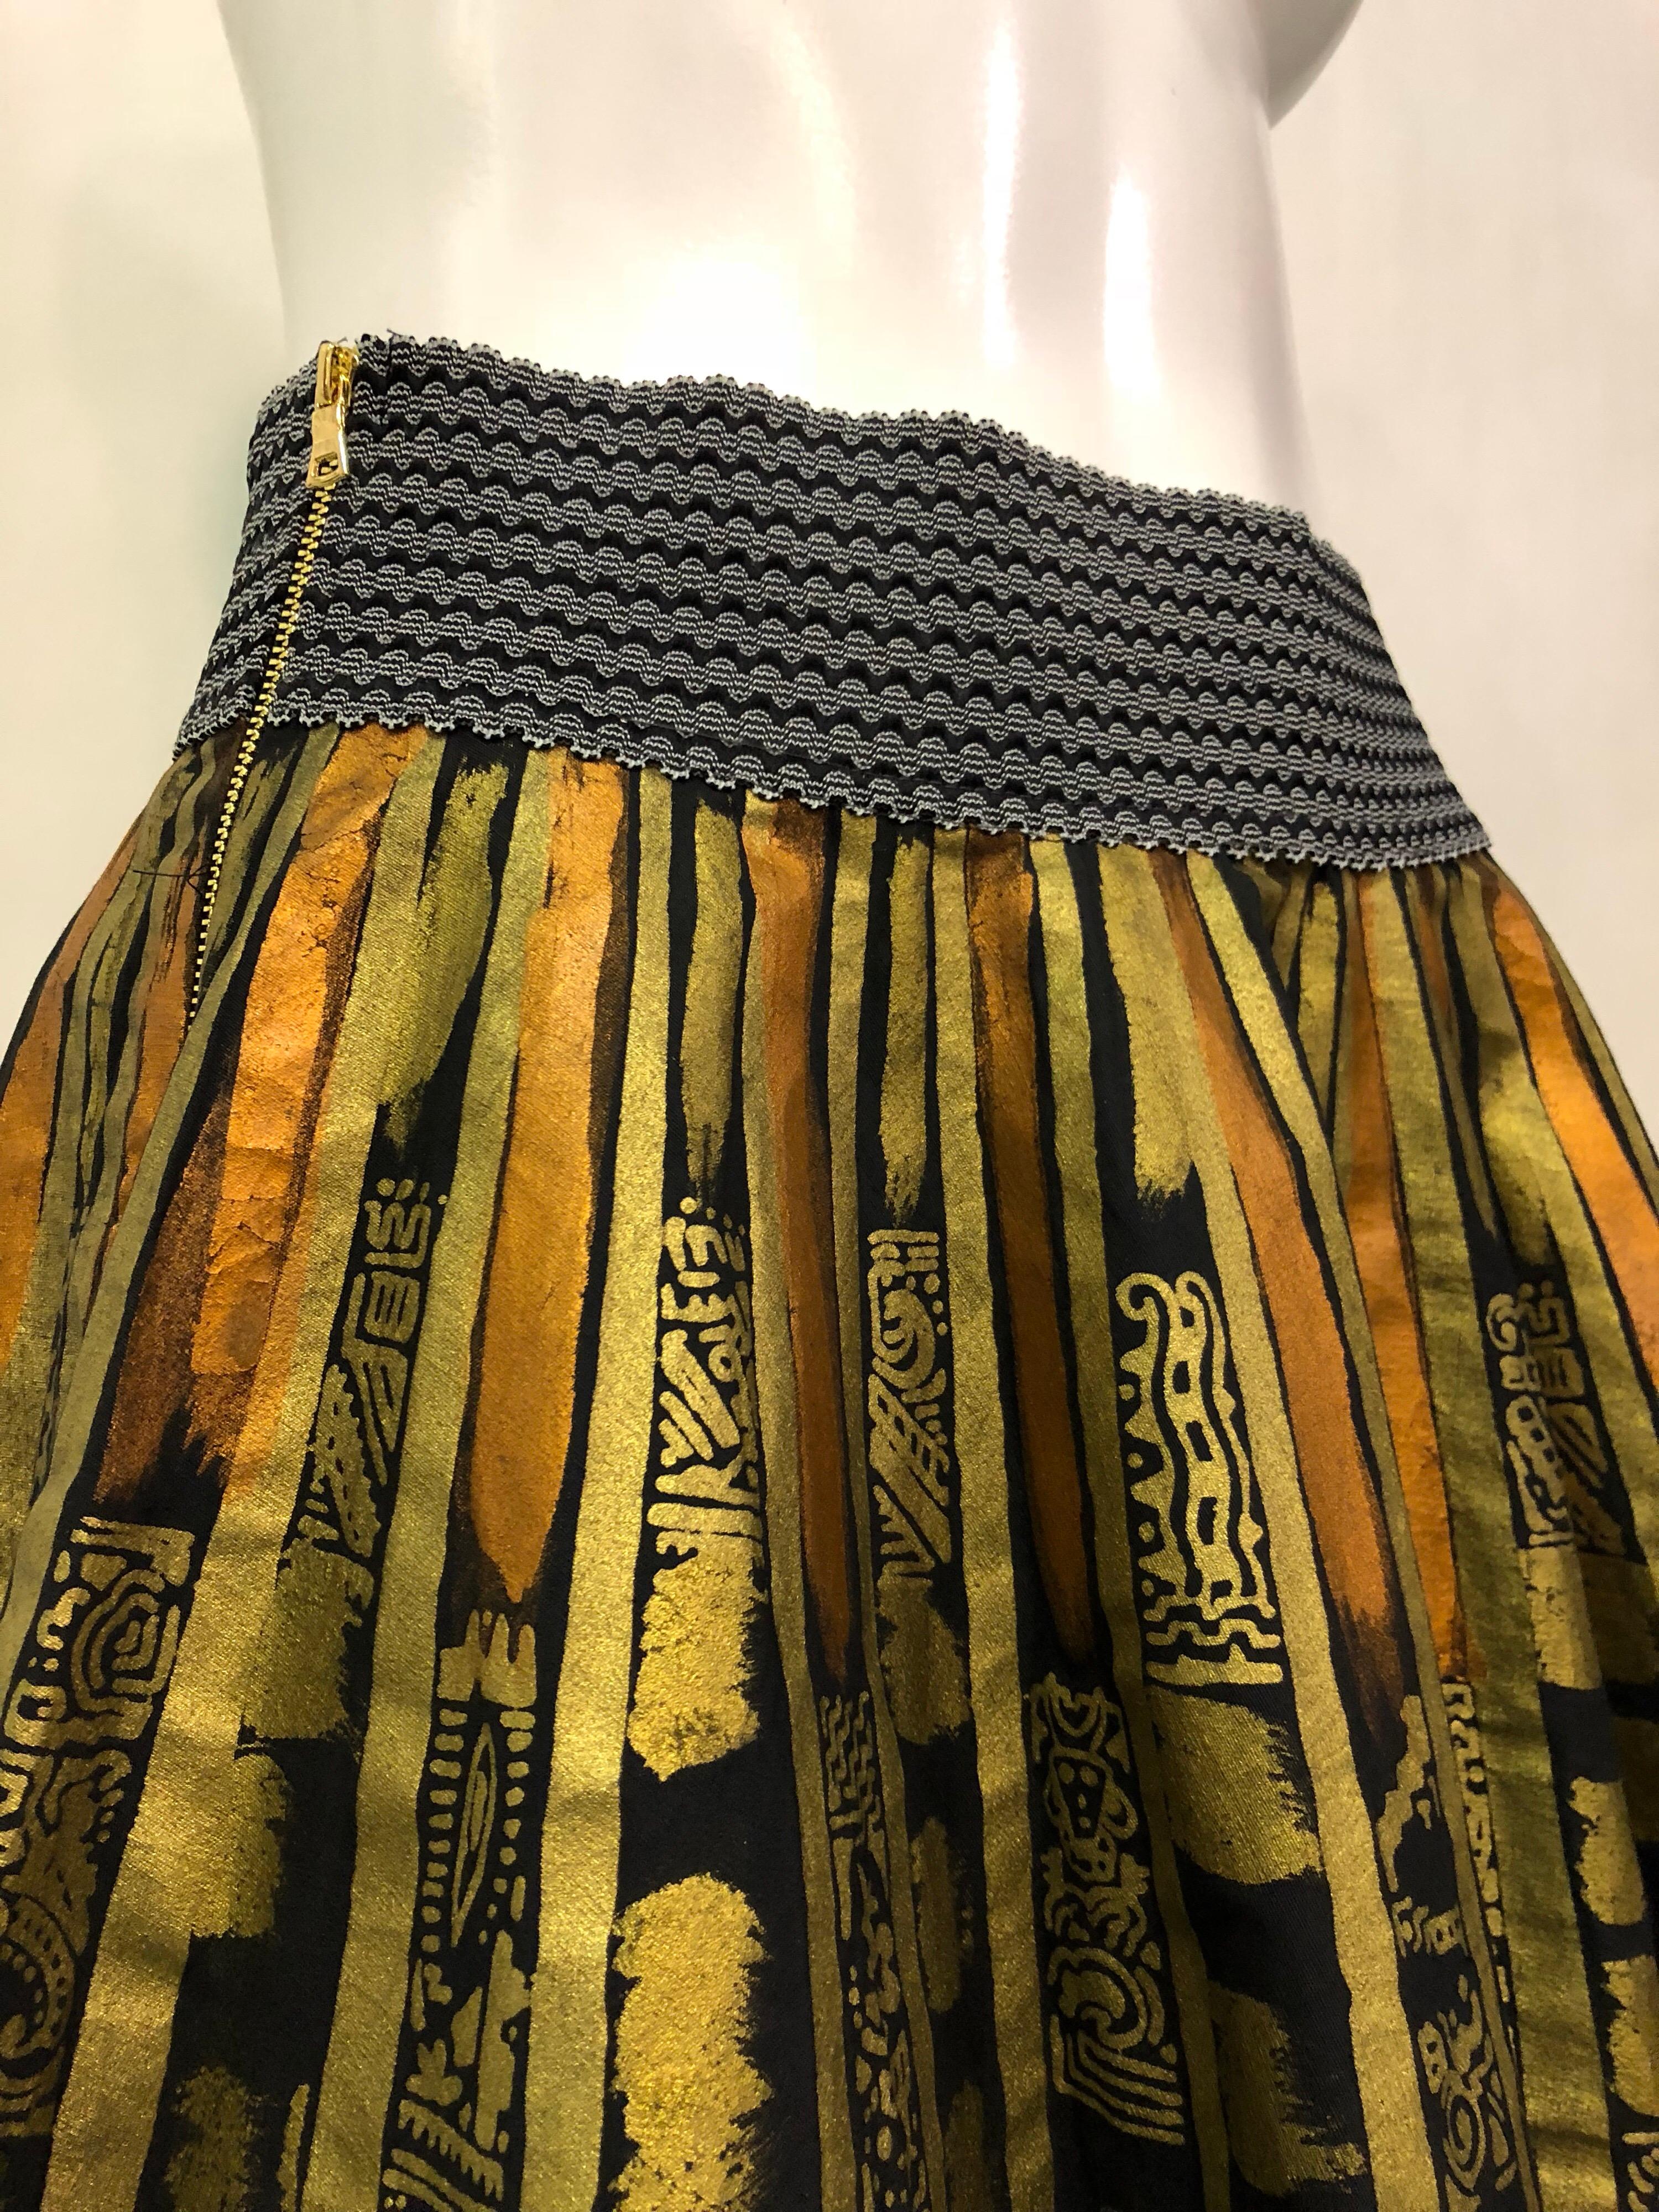 1950s hand painted black cotton Mexican circle skirt in vibrant metallic colors features a decorative elastic waistband and double side zippers. This wonderful and traditional work of art by Salpra of Mexico has been modernized with a newly replace